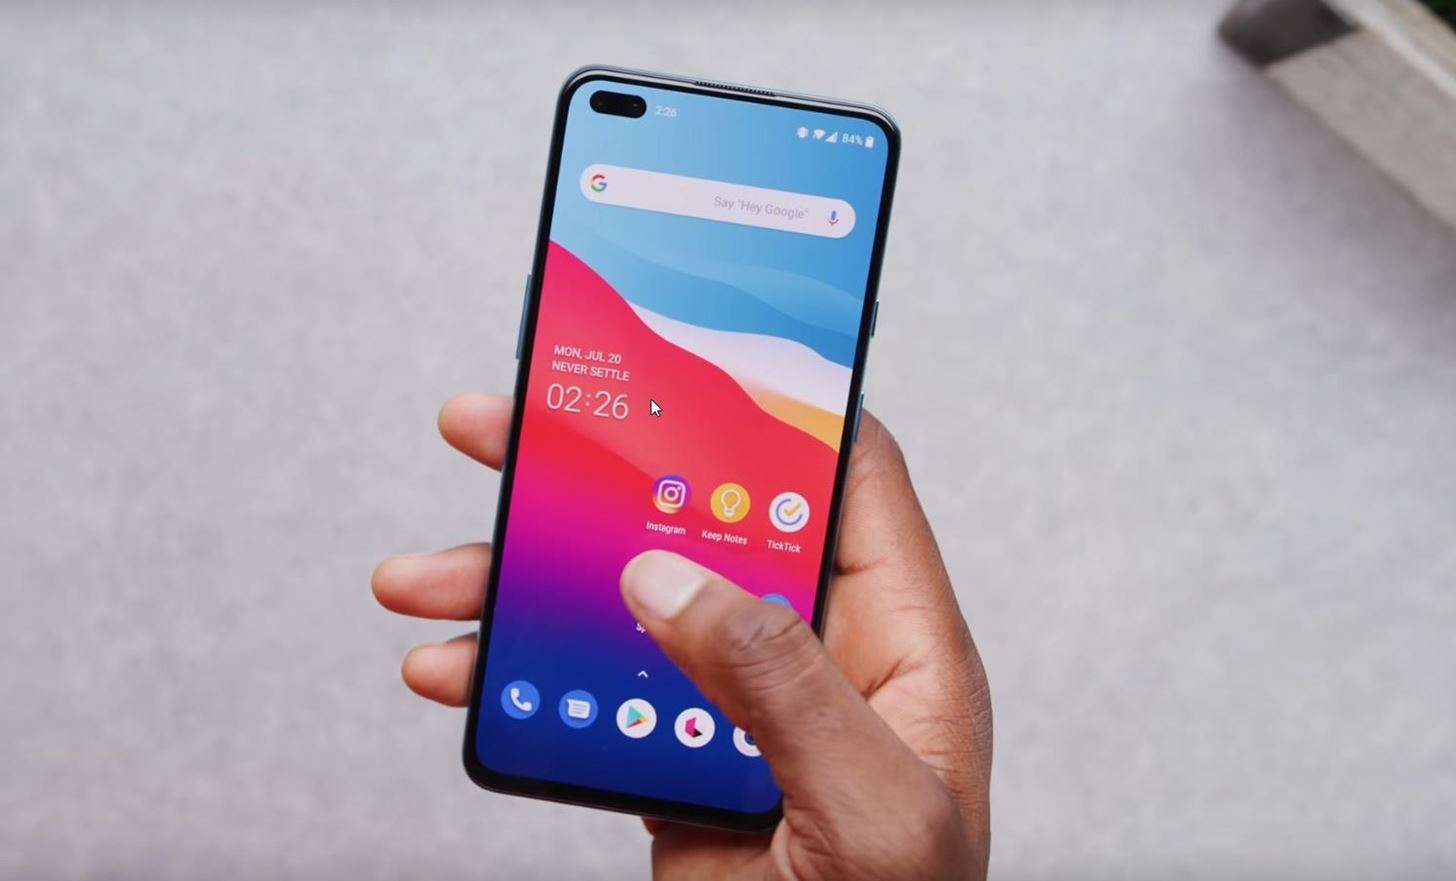 The Return of the 'Budget Flagship' — Here's What the Major OEMs Are Doing to Combat $1,000+ Phone Prices